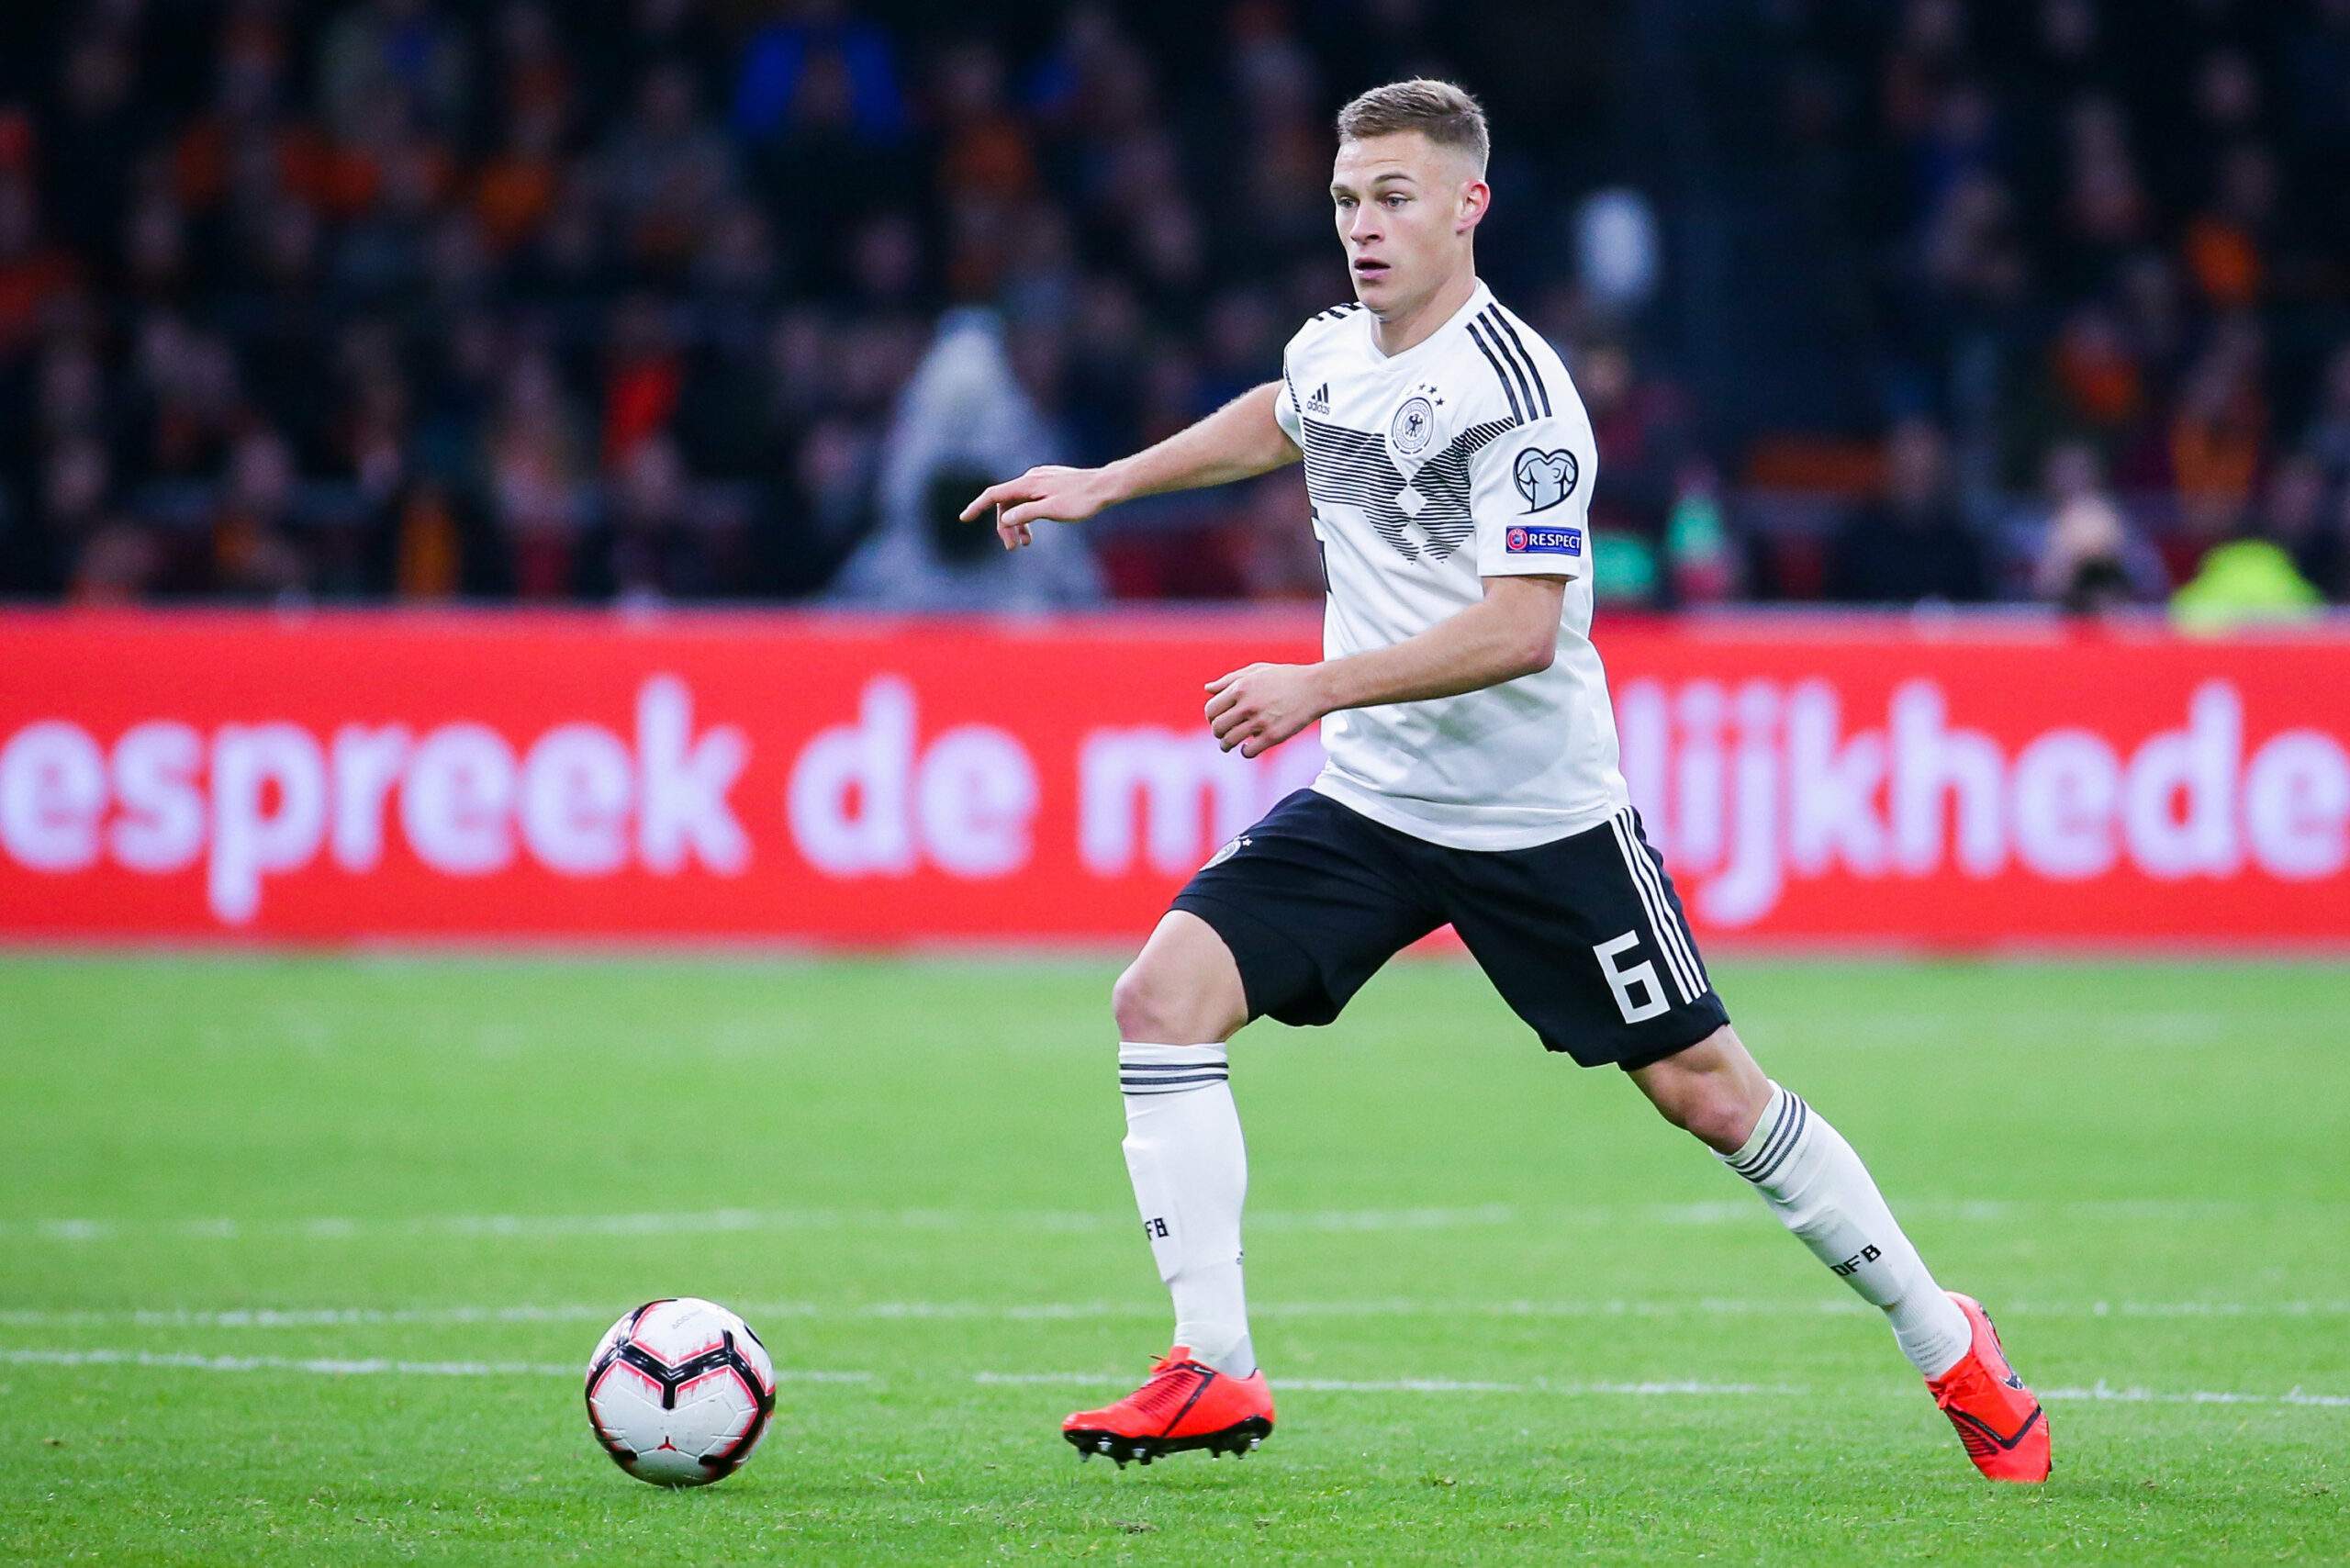 24.03.2019, Johan Cruijff Arena, Amsterdam, NED, UEFA EM Qualifikation, Niederlande vs Deutschland, Gruppe C, im Bild Joshua Kimmich (Deutschland) // during the UEFA European Championship qualification, group C match between Netherlands and Germany at the Johan Cruijff Arena in Amsterdam, Netherlands on 2019/03/24. EXPA Pictures © 2019, PhotoCredit: EXPA/ Eibner-Pressefoto/ Tom Weller *****ATTENTION - OUT of GER***** FOT. EXPA / NEWSPIX.PL AUSTRIA, Italy, Spain, Slovenia, Serbia, Croatia, Germany, UK, USA and Sweden OUT! --- Newspix.pl *** Local Caption *** www.newspix.pl mail us: info@newspix.pl call us: 0048 022 23 22 222 --- Polish Picture Agency by Ringier Axel Springer Poland